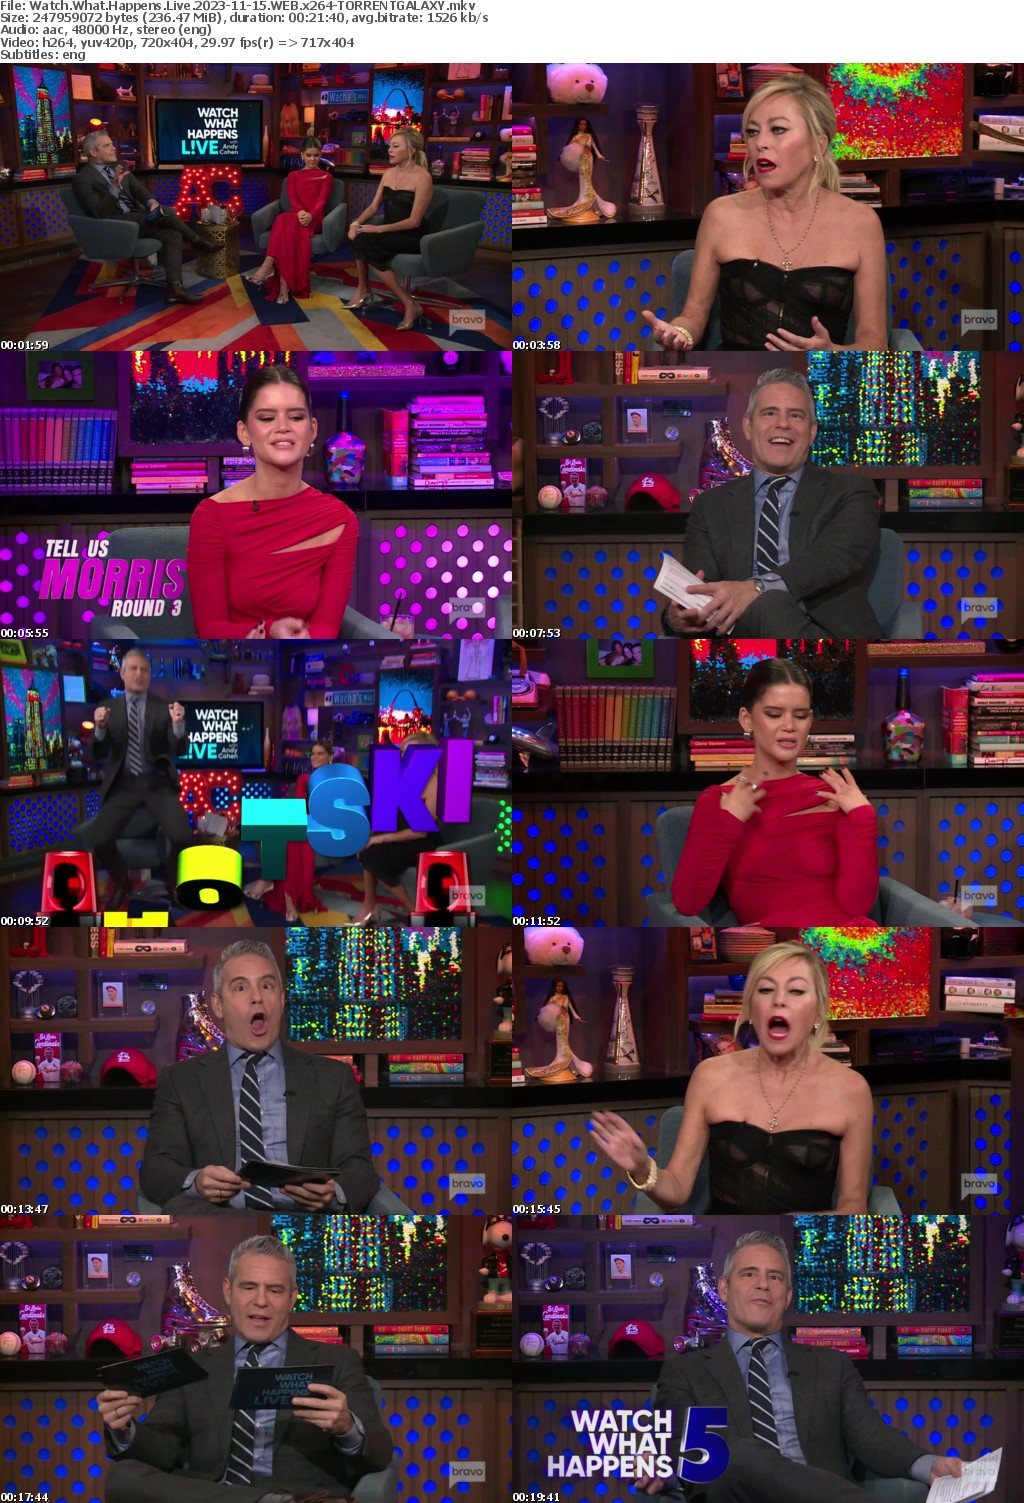 Watch What Happens Live 2023-11-15 WEB x264-GALAXY